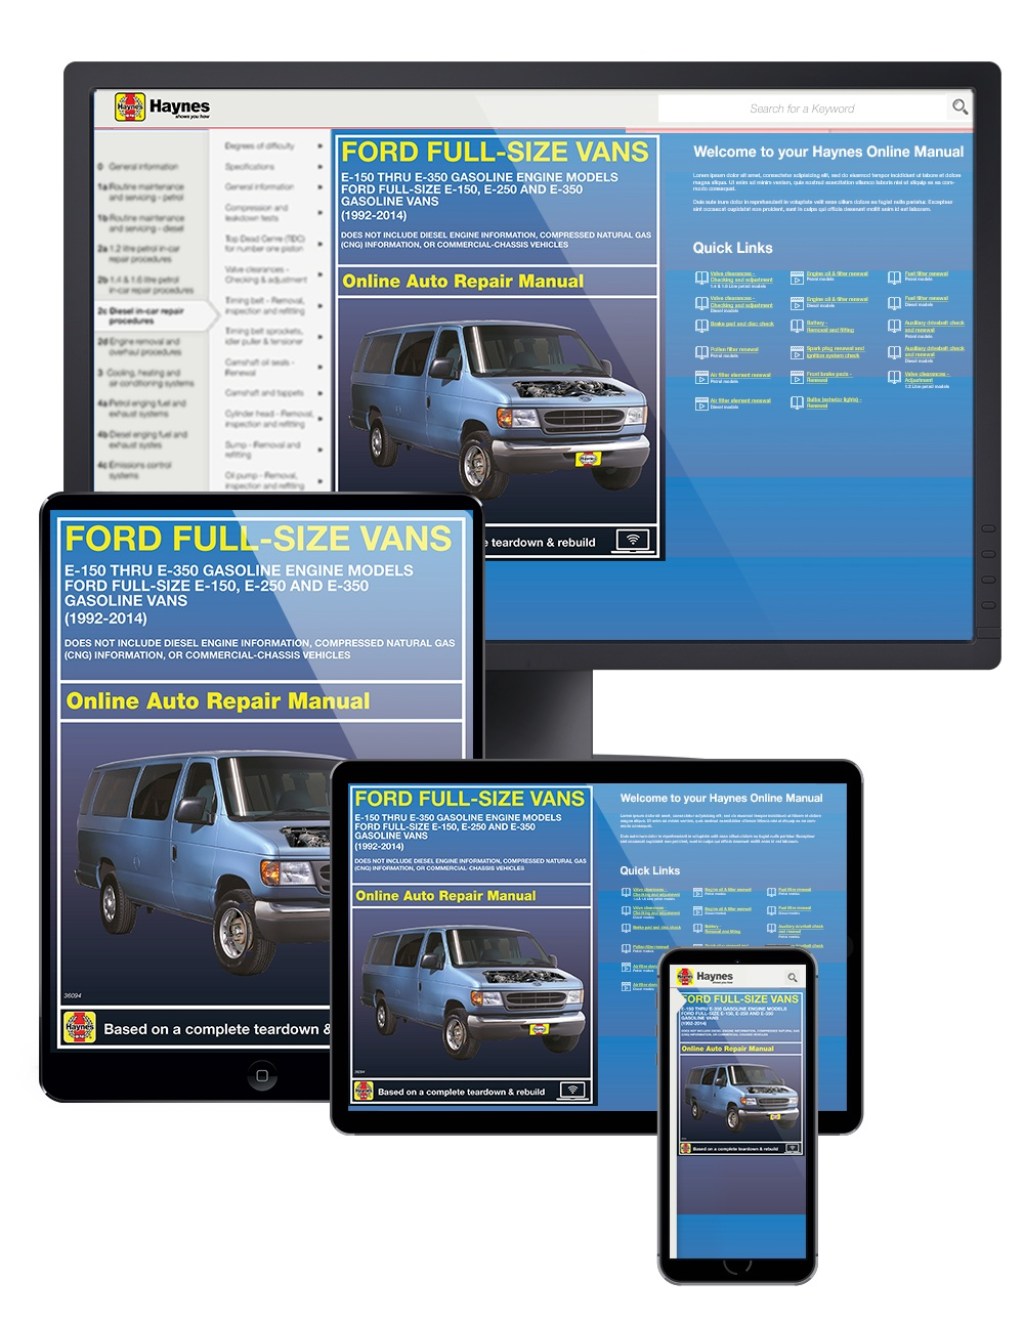 Picture of: Ford E- thru E- Full-size Vans (-) Haynes Online Manual